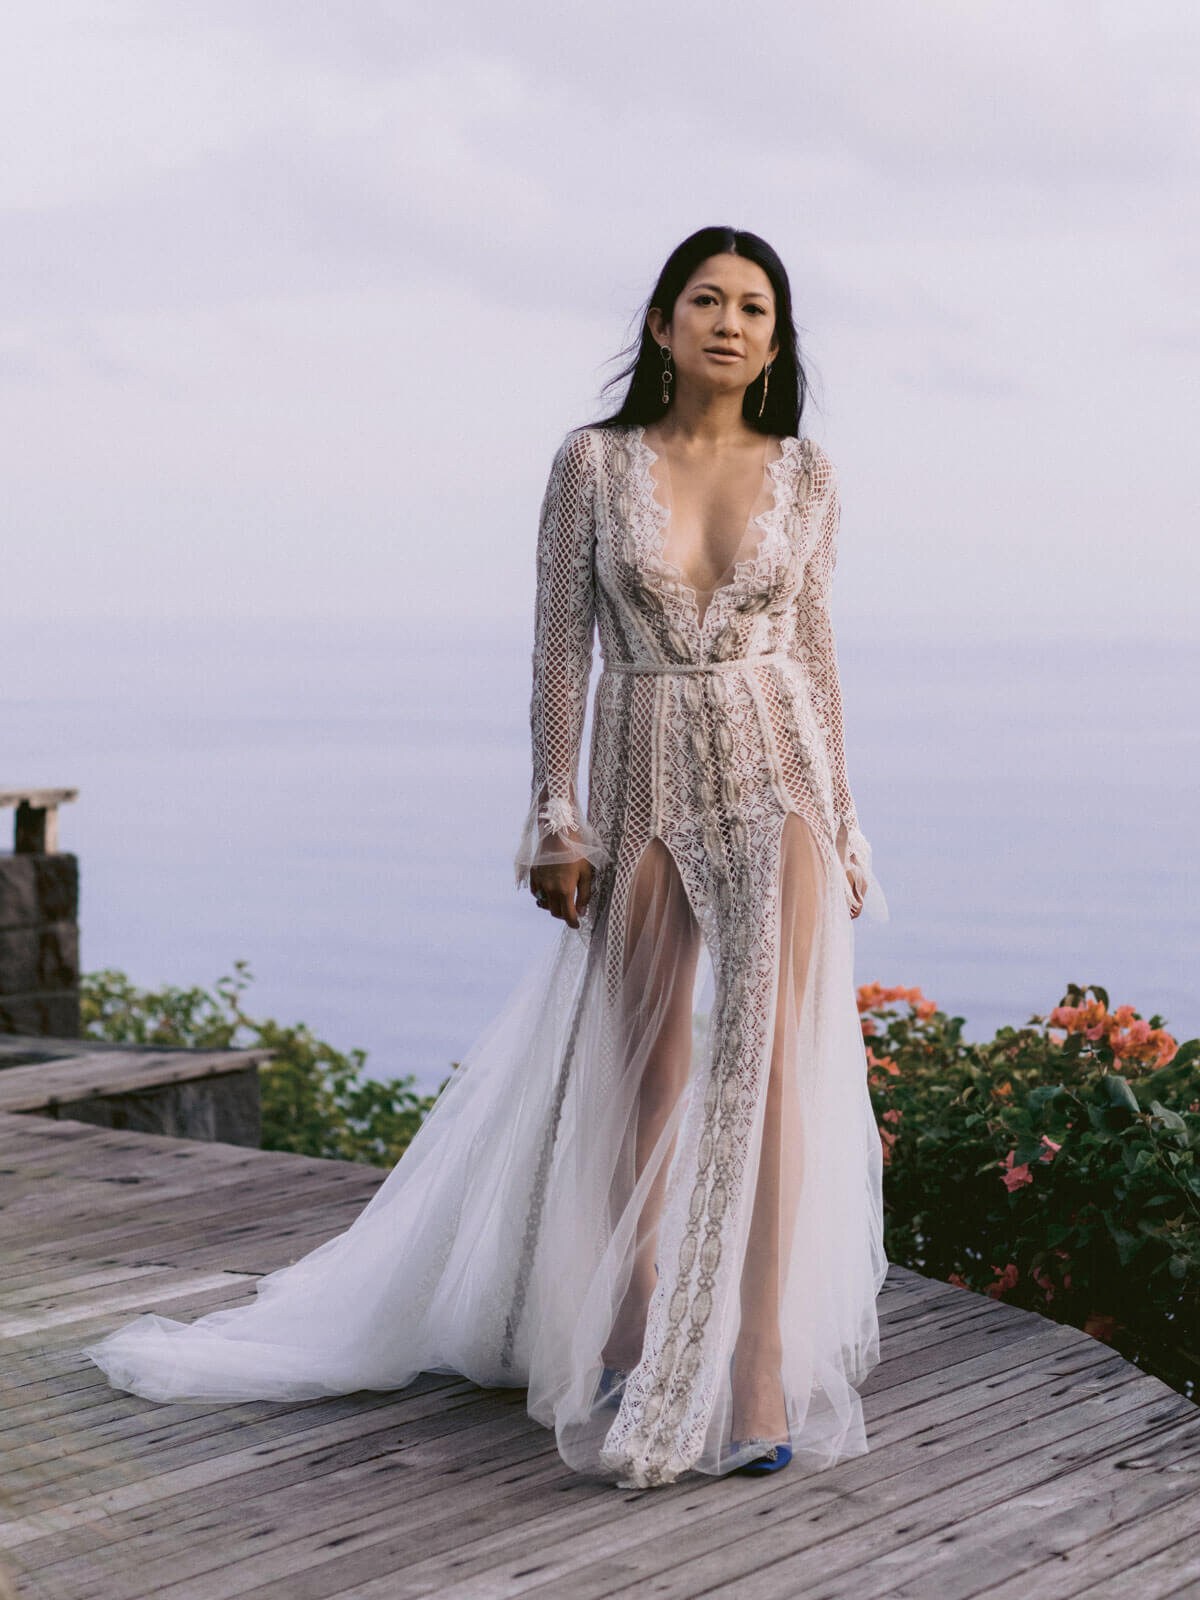 The gorgeous bride in her daring wedding dress, the ocean is in the background in Khayangan Estate, Bali, Indonesia. Image by Jenny Fu Studio